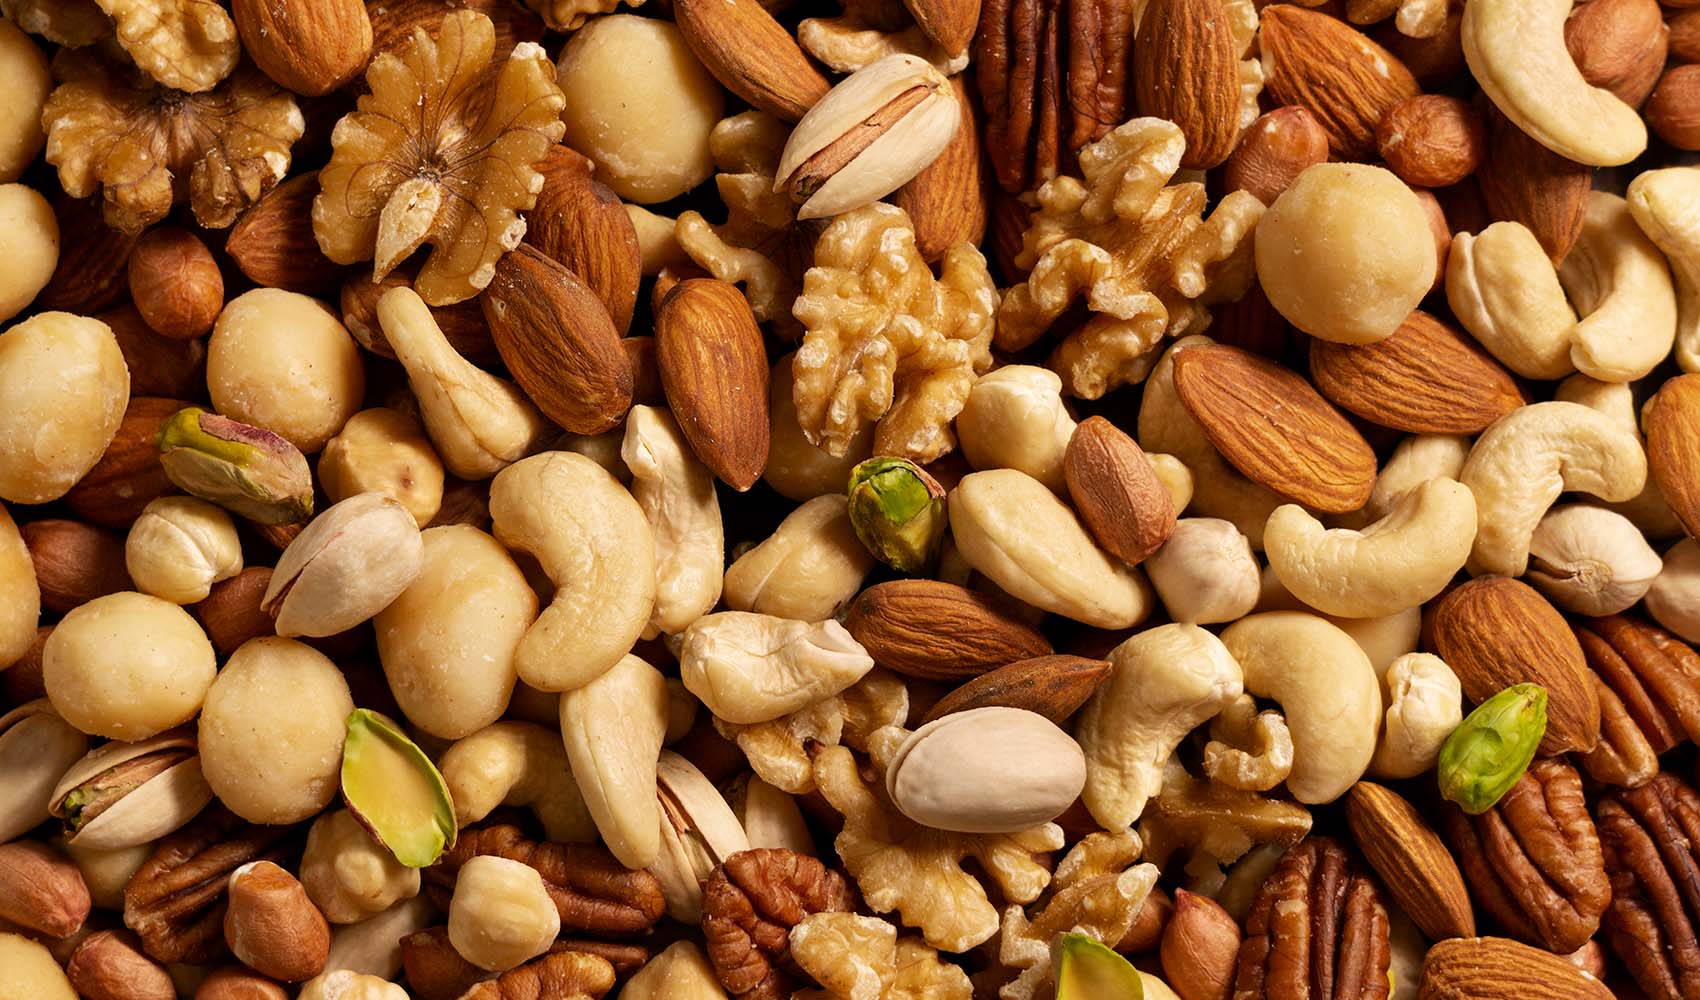 benefits-of-raw-nuts-which-nuts-are-healthiest-3